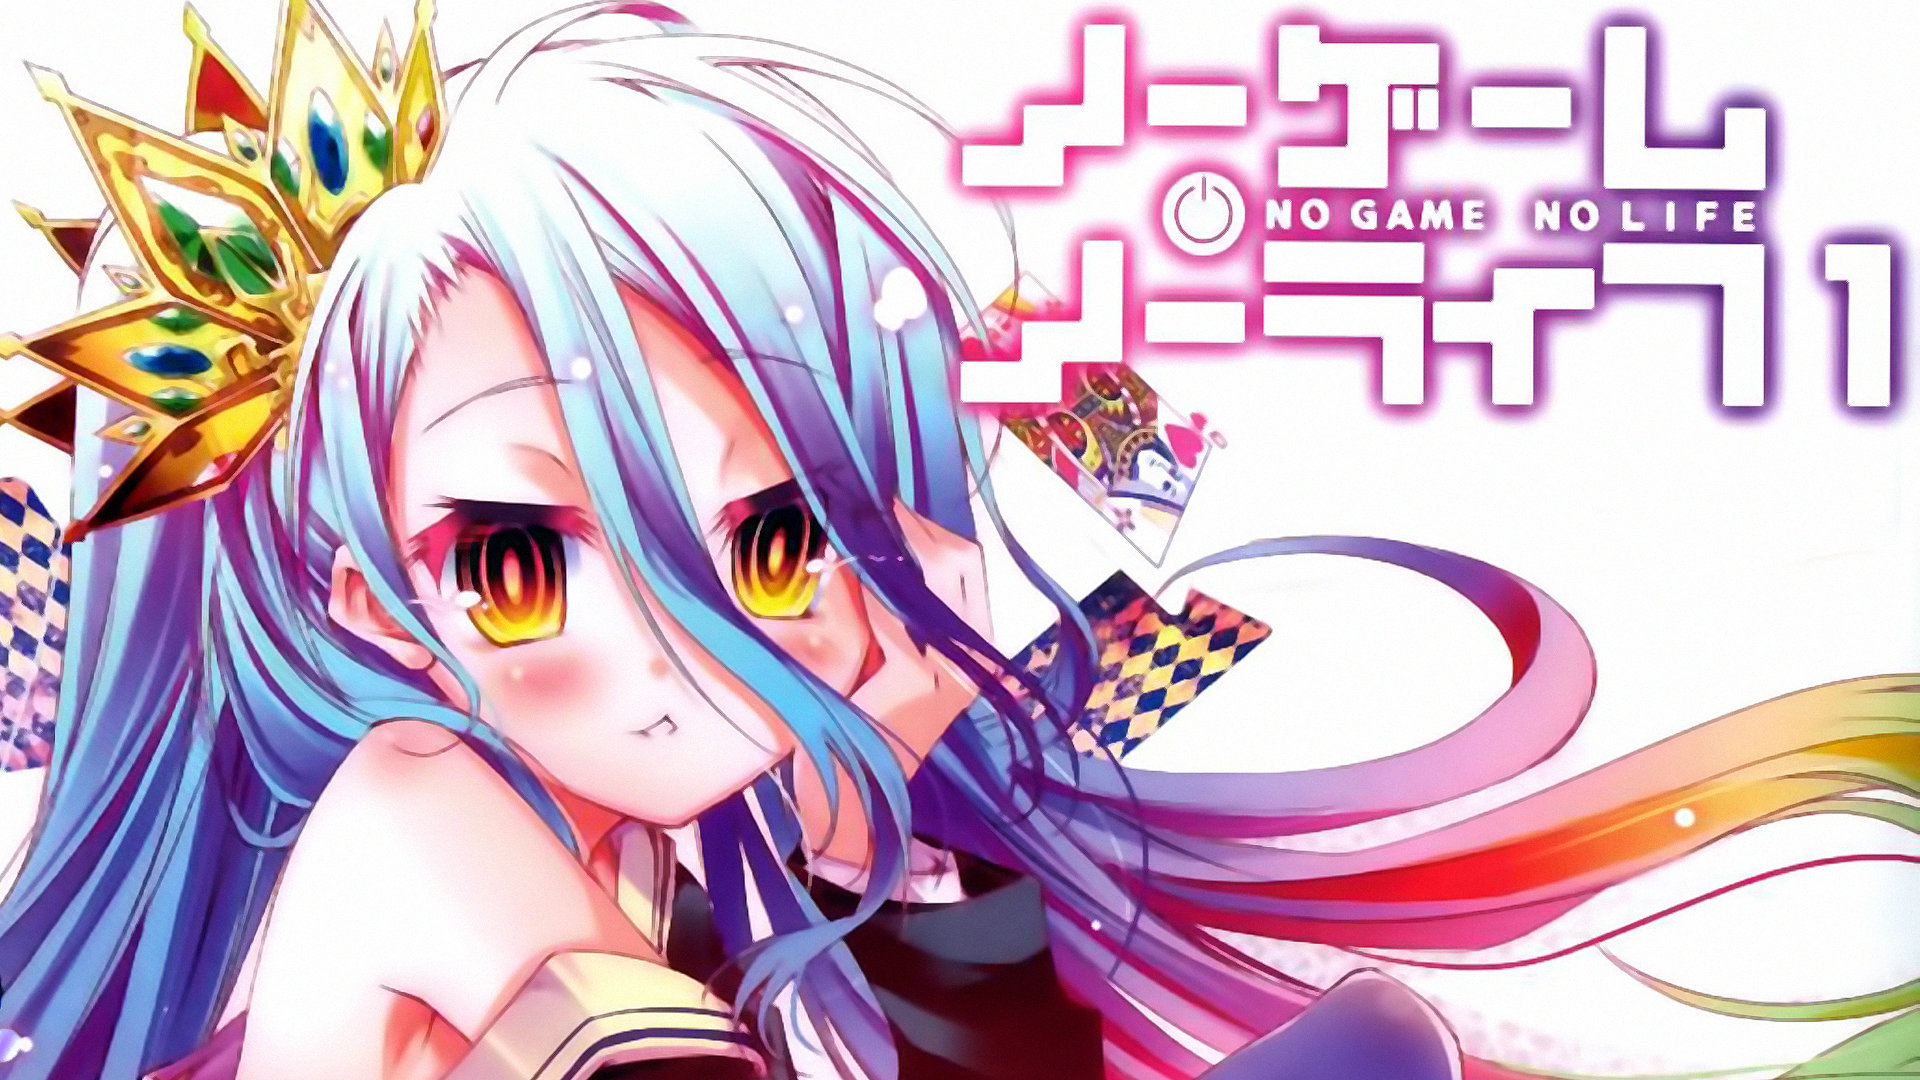 Download full hd 1920x1080 Shiro (No Game No Life) computer background ID:102357 for free